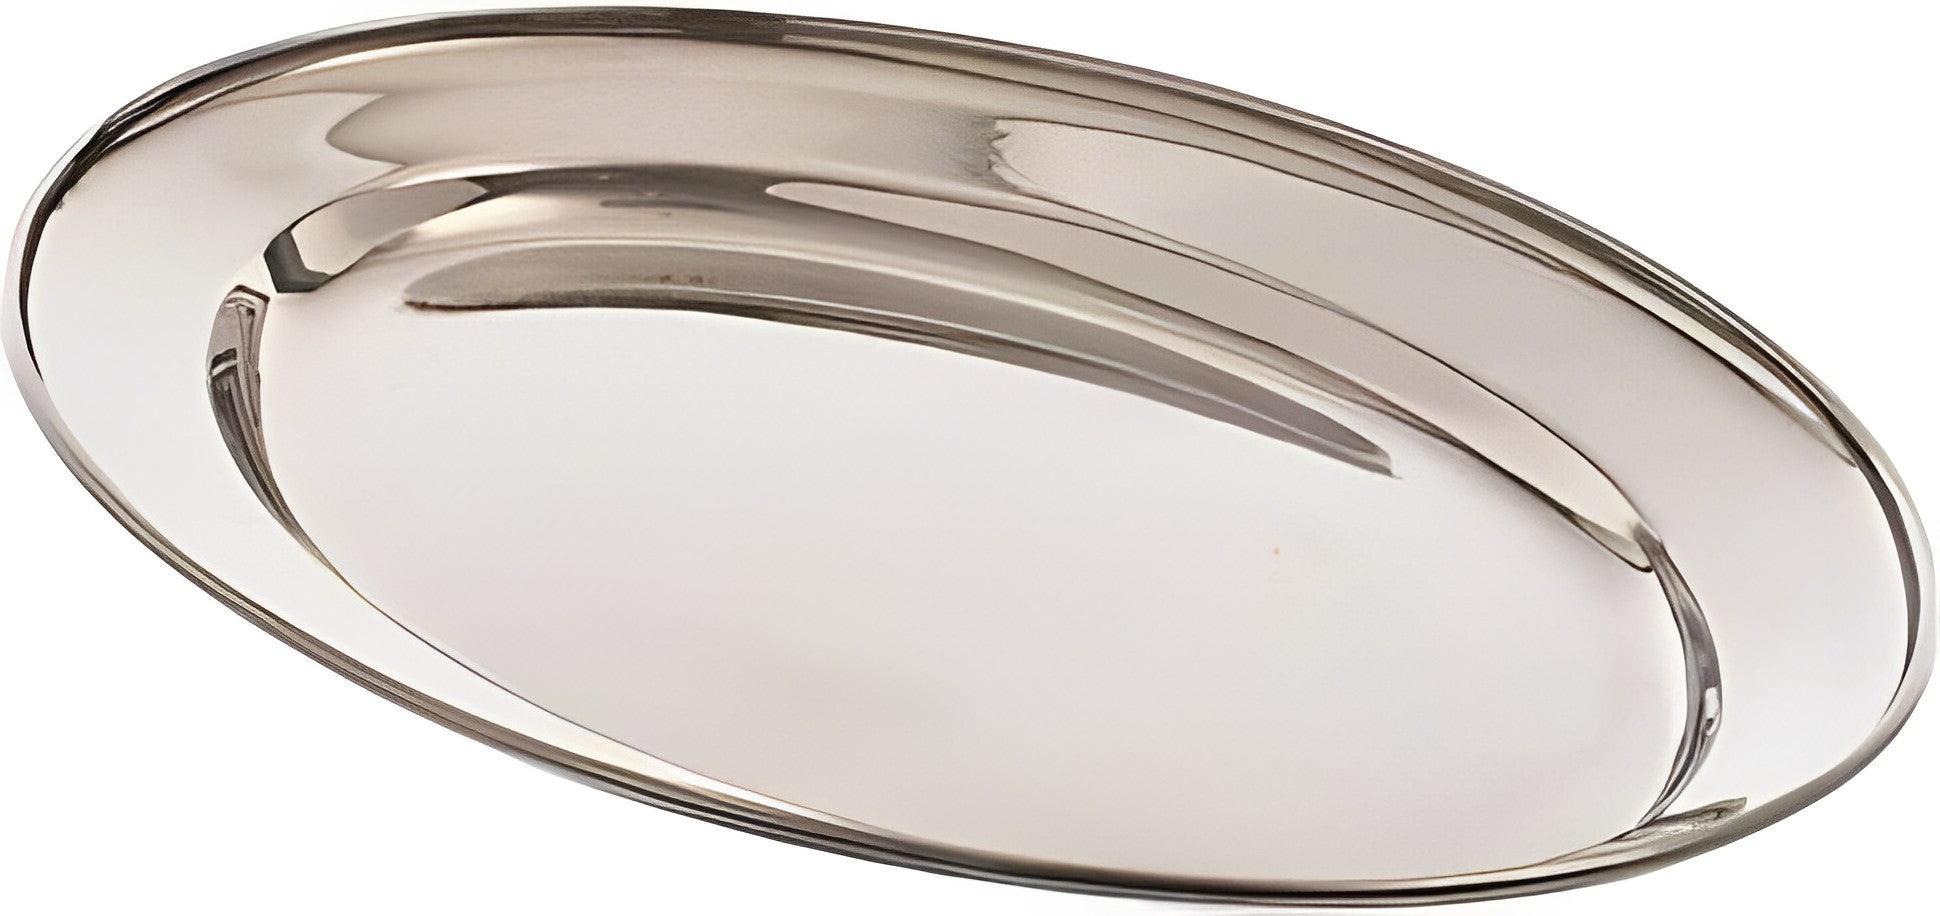 Browne - 18" Stainless Steel Oval Platter - 574184